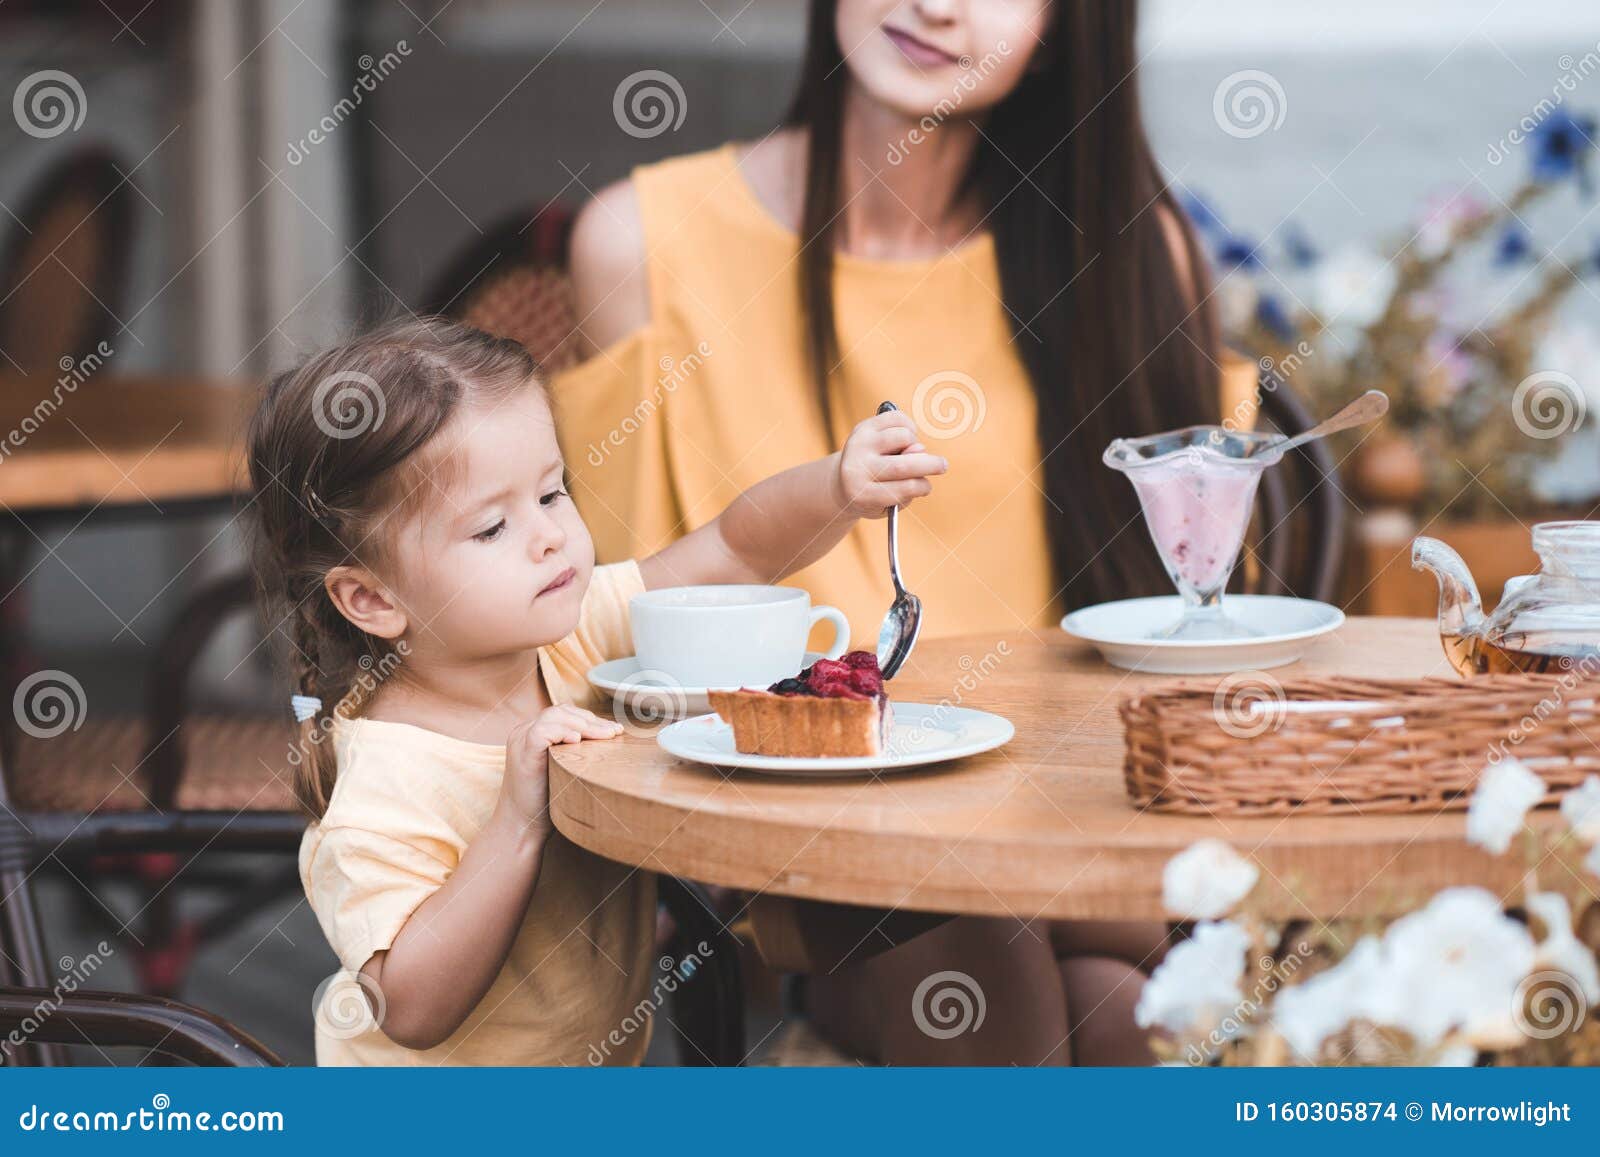 Child Girl with Mother in Cafe Stock Photo - Image of maternity ...